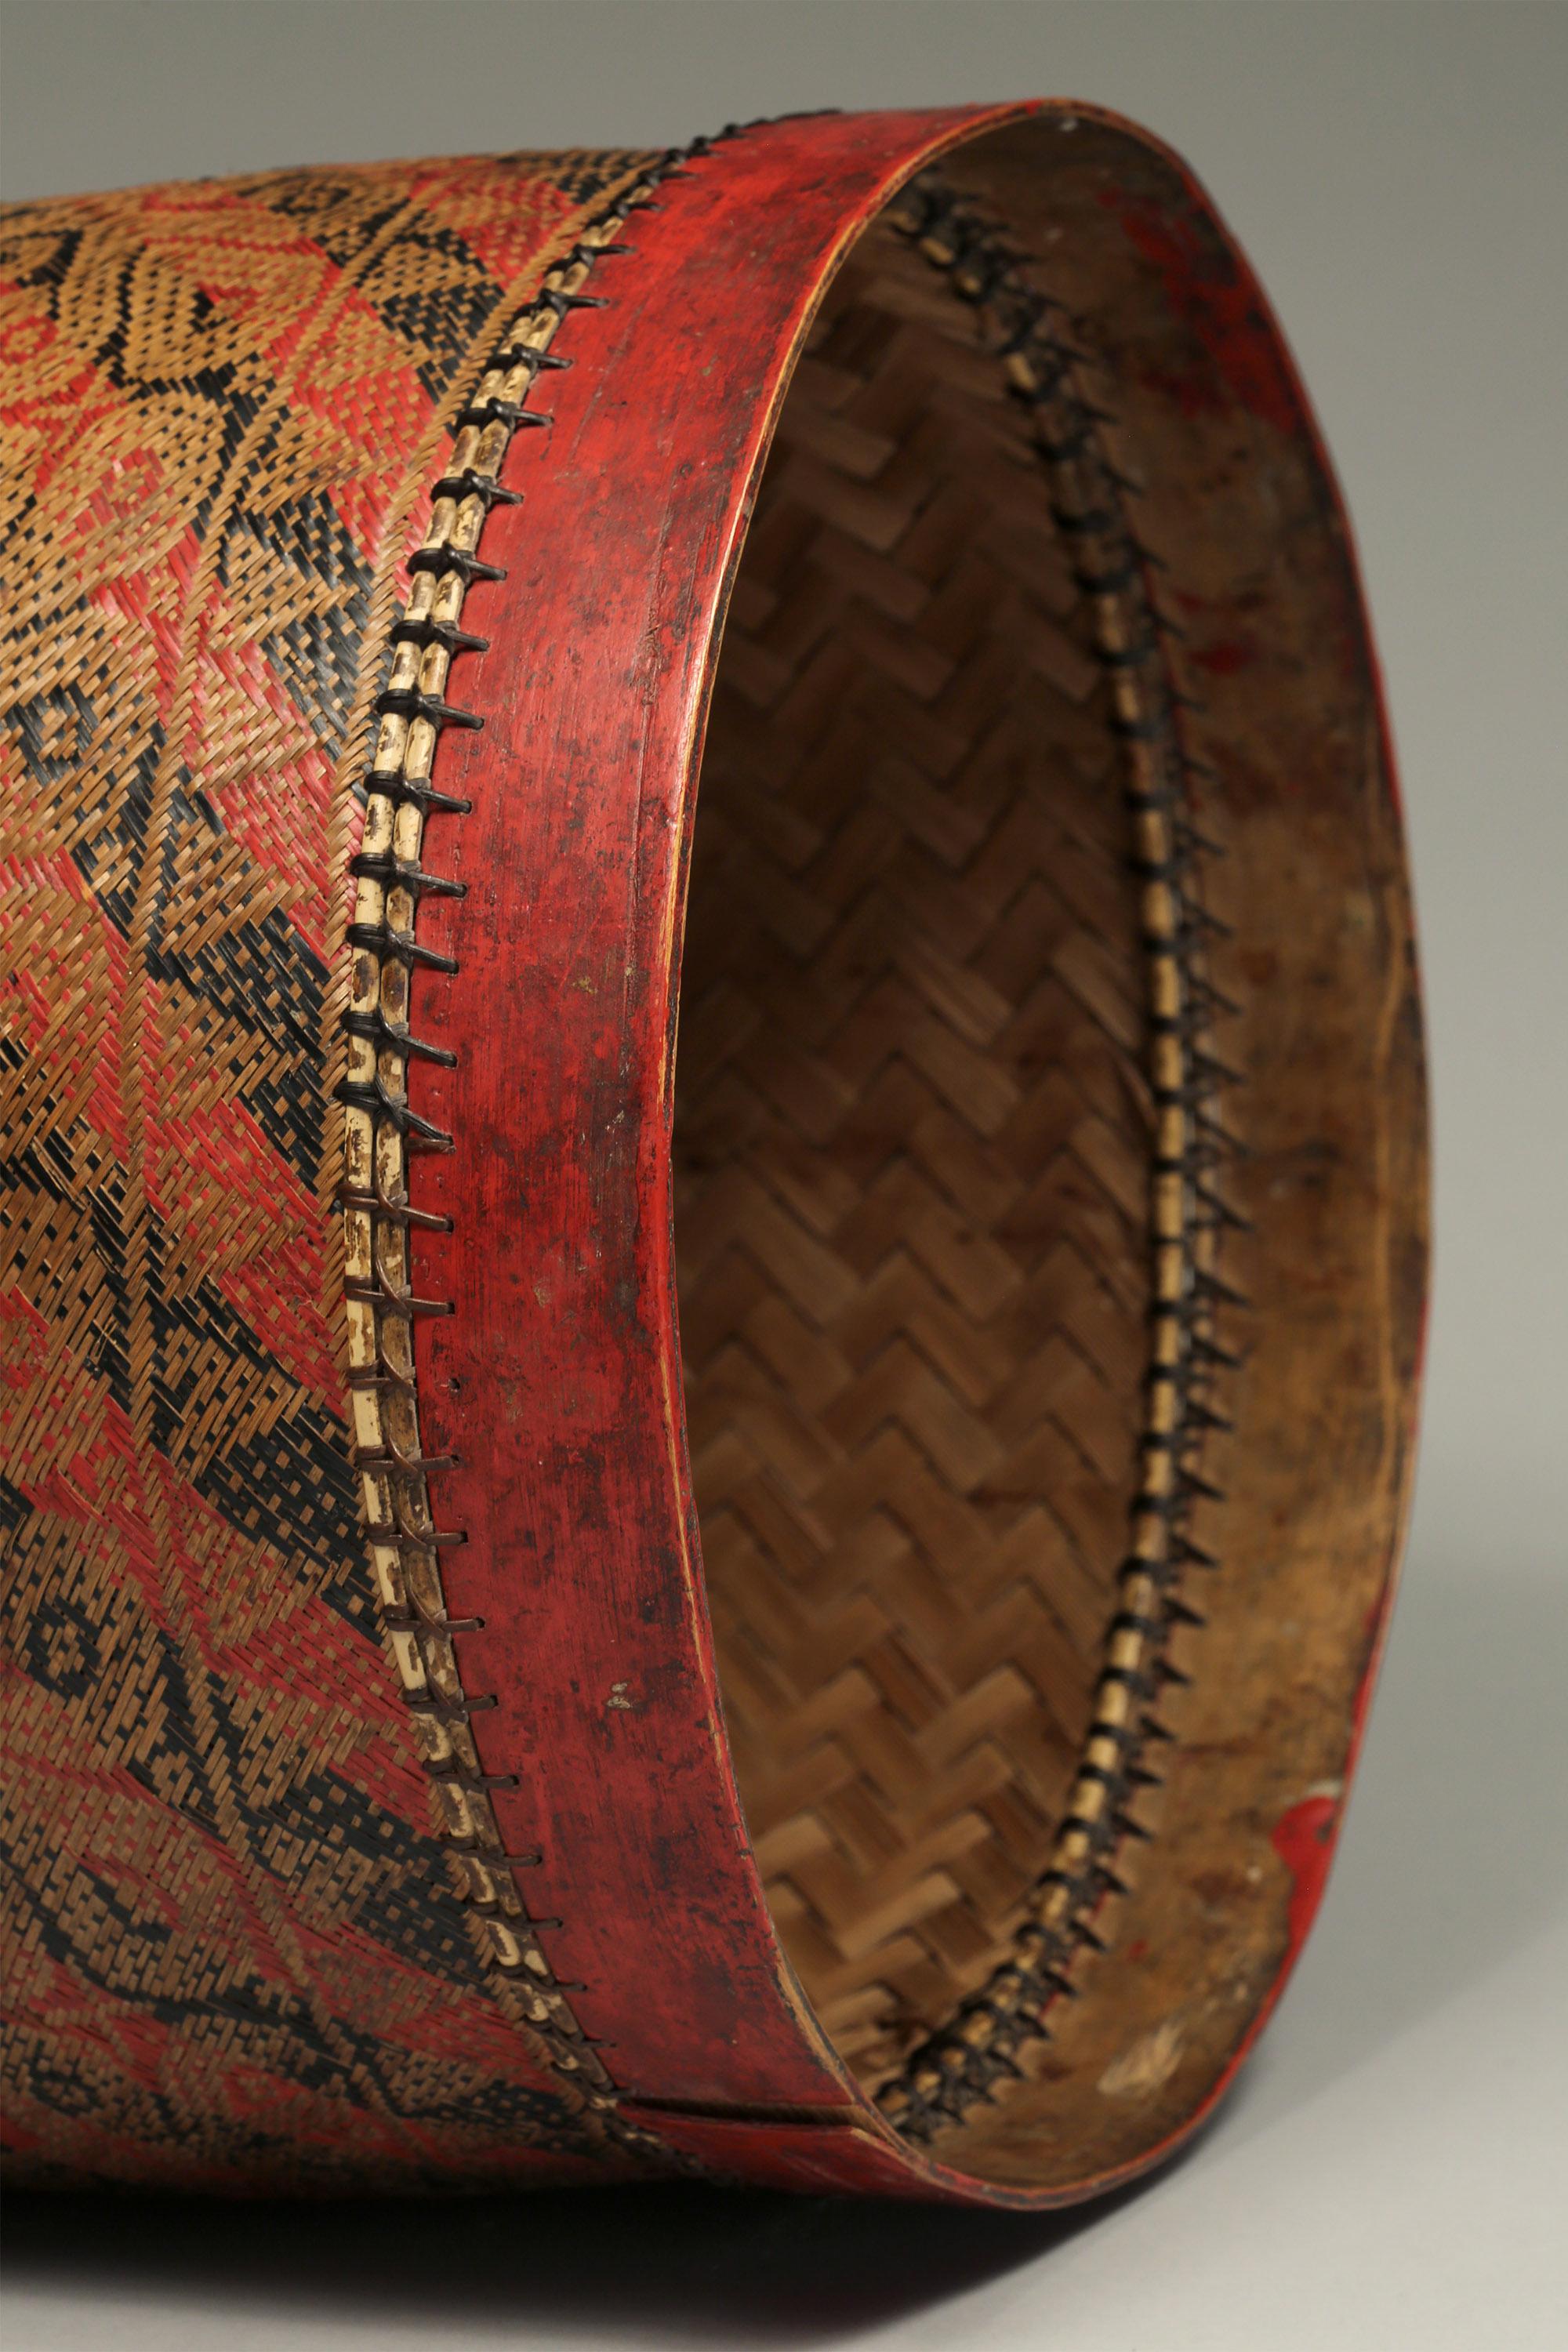 Tribal Large Dowry Basket from Iban Dayak, Sarawak, Early 20th Century